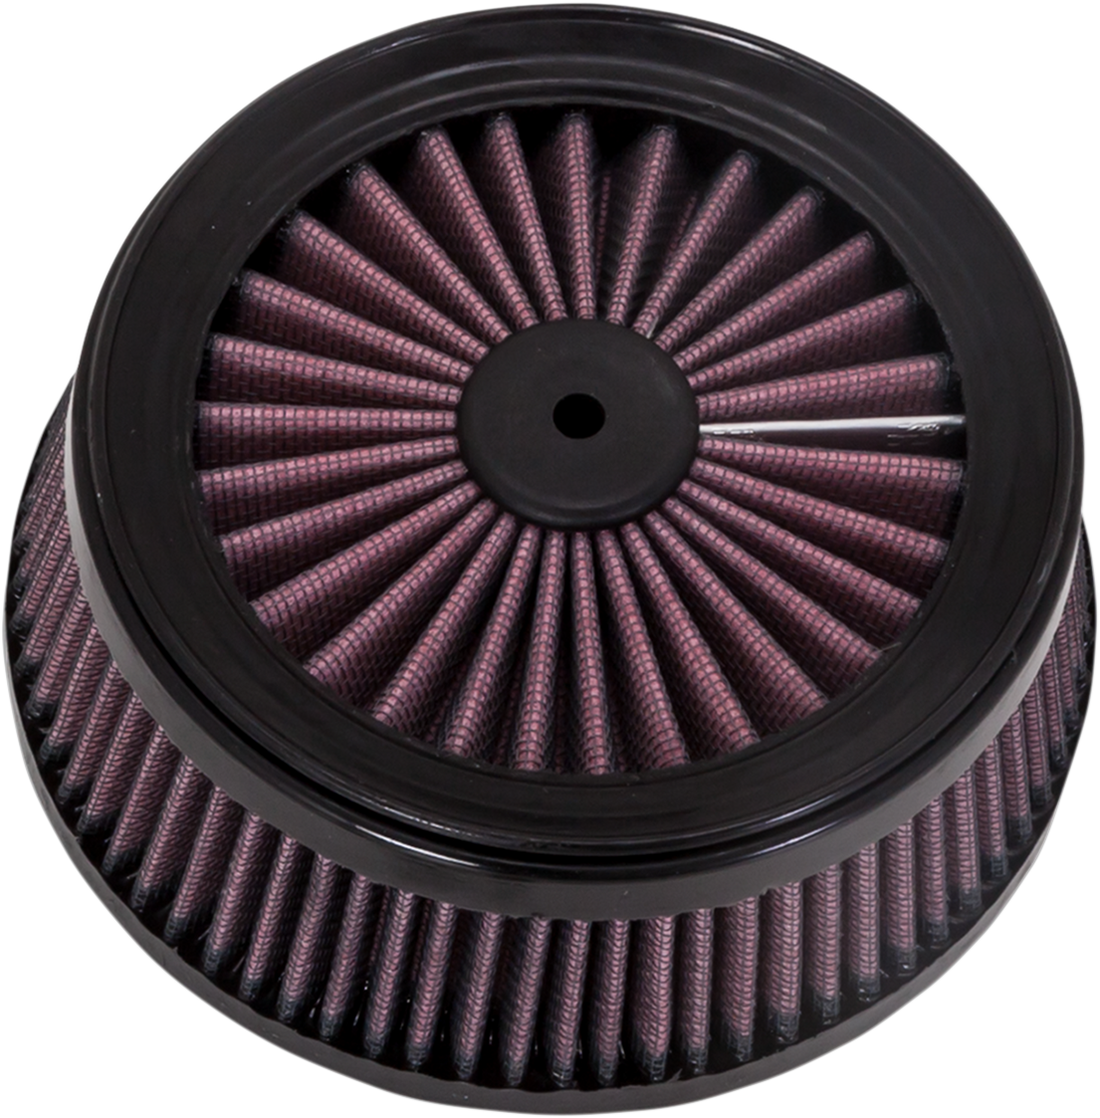 1011-4570 - VANCE & HINES Replacement Air Filter - Red 23721